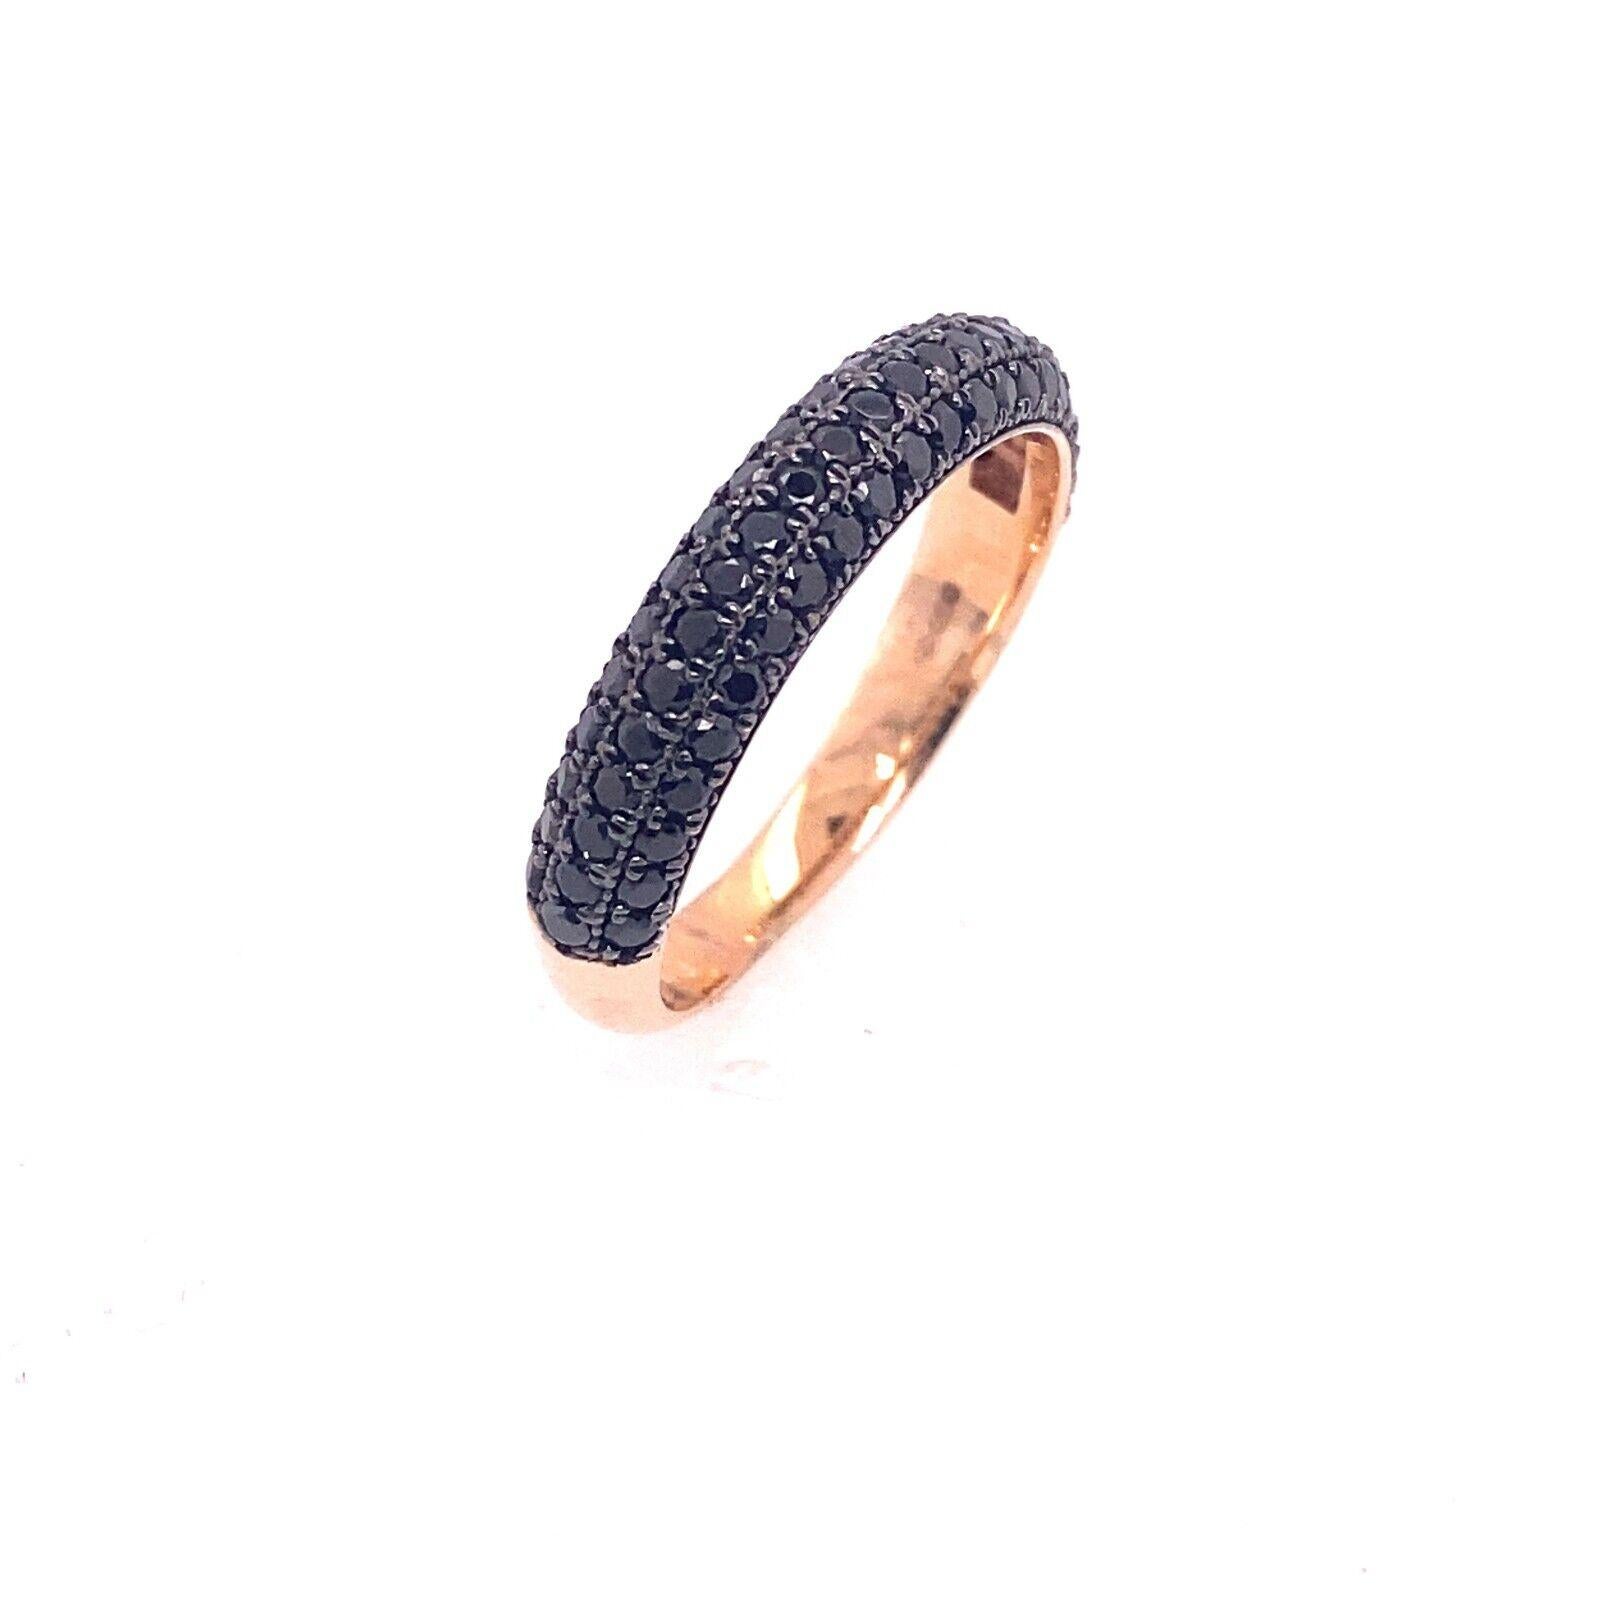 14ct Rose Gold Ring, Set With 3 Row Black Diamond, 1.60ct

The ring is crafted in 14ct rose gold, set with 0.70ct of natural black diamonds. and has a unique design that is sure to draw attention from everyone who sees it.

Additional